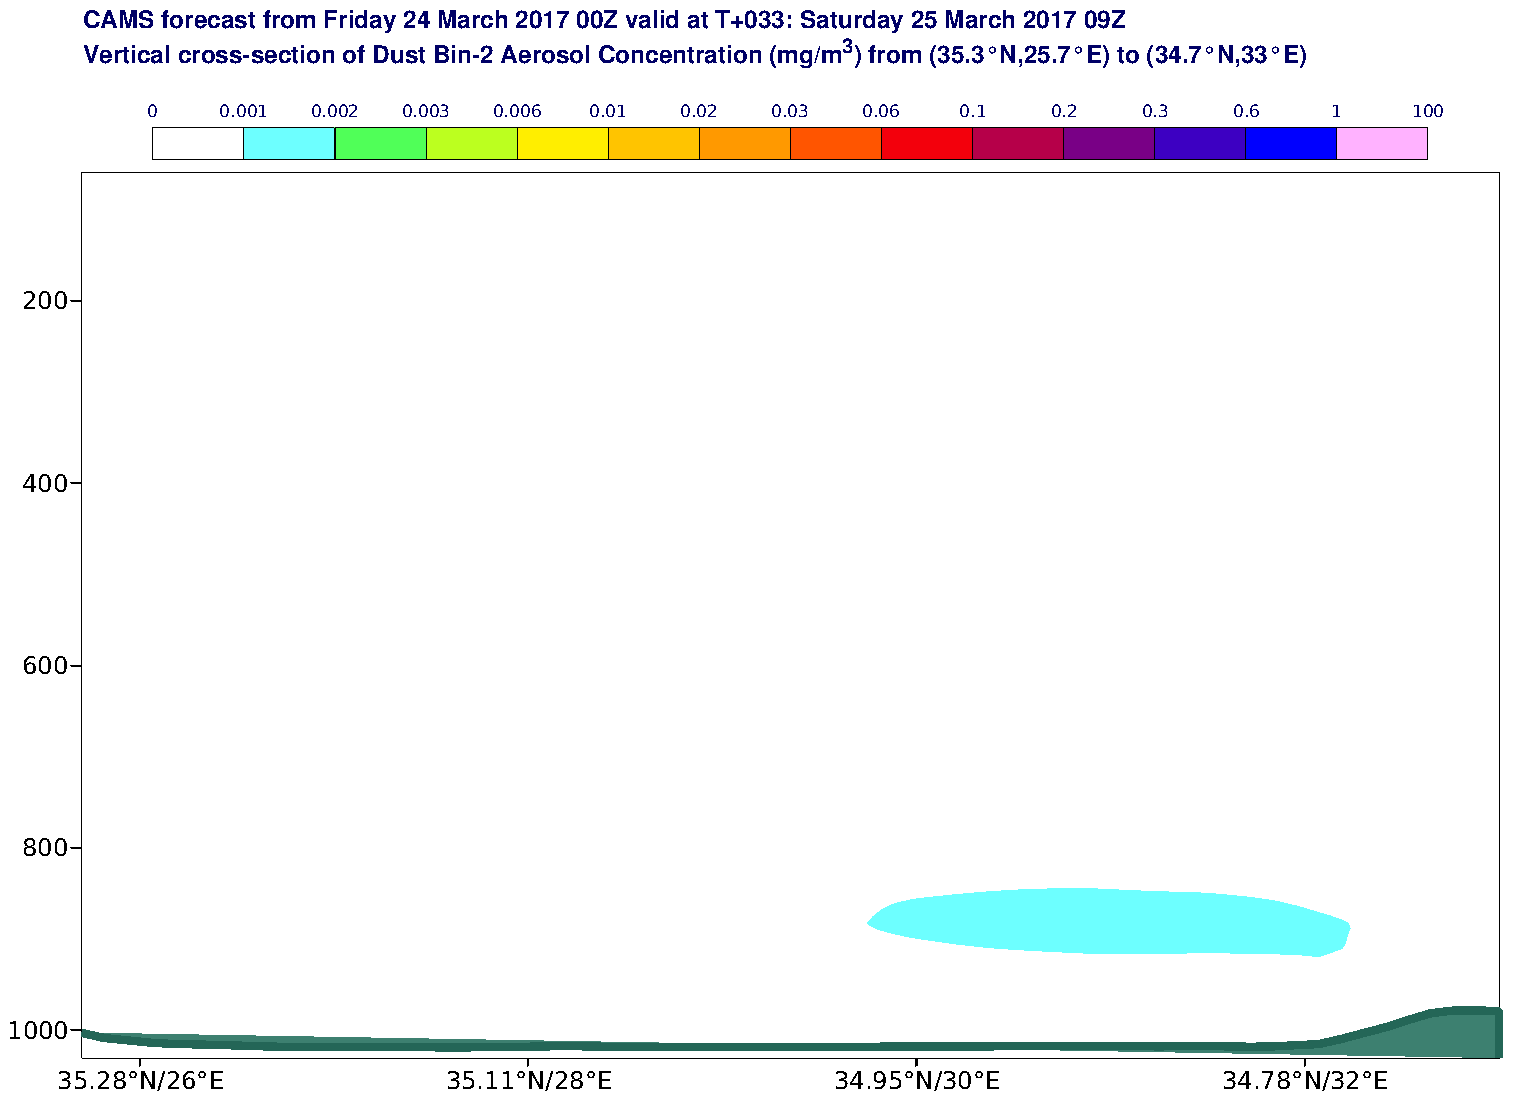 Vertical cross-section of Dust Bin-2 Aerosol Concentration (mg/m3) valid at T33 - 2017-03-25 09:00